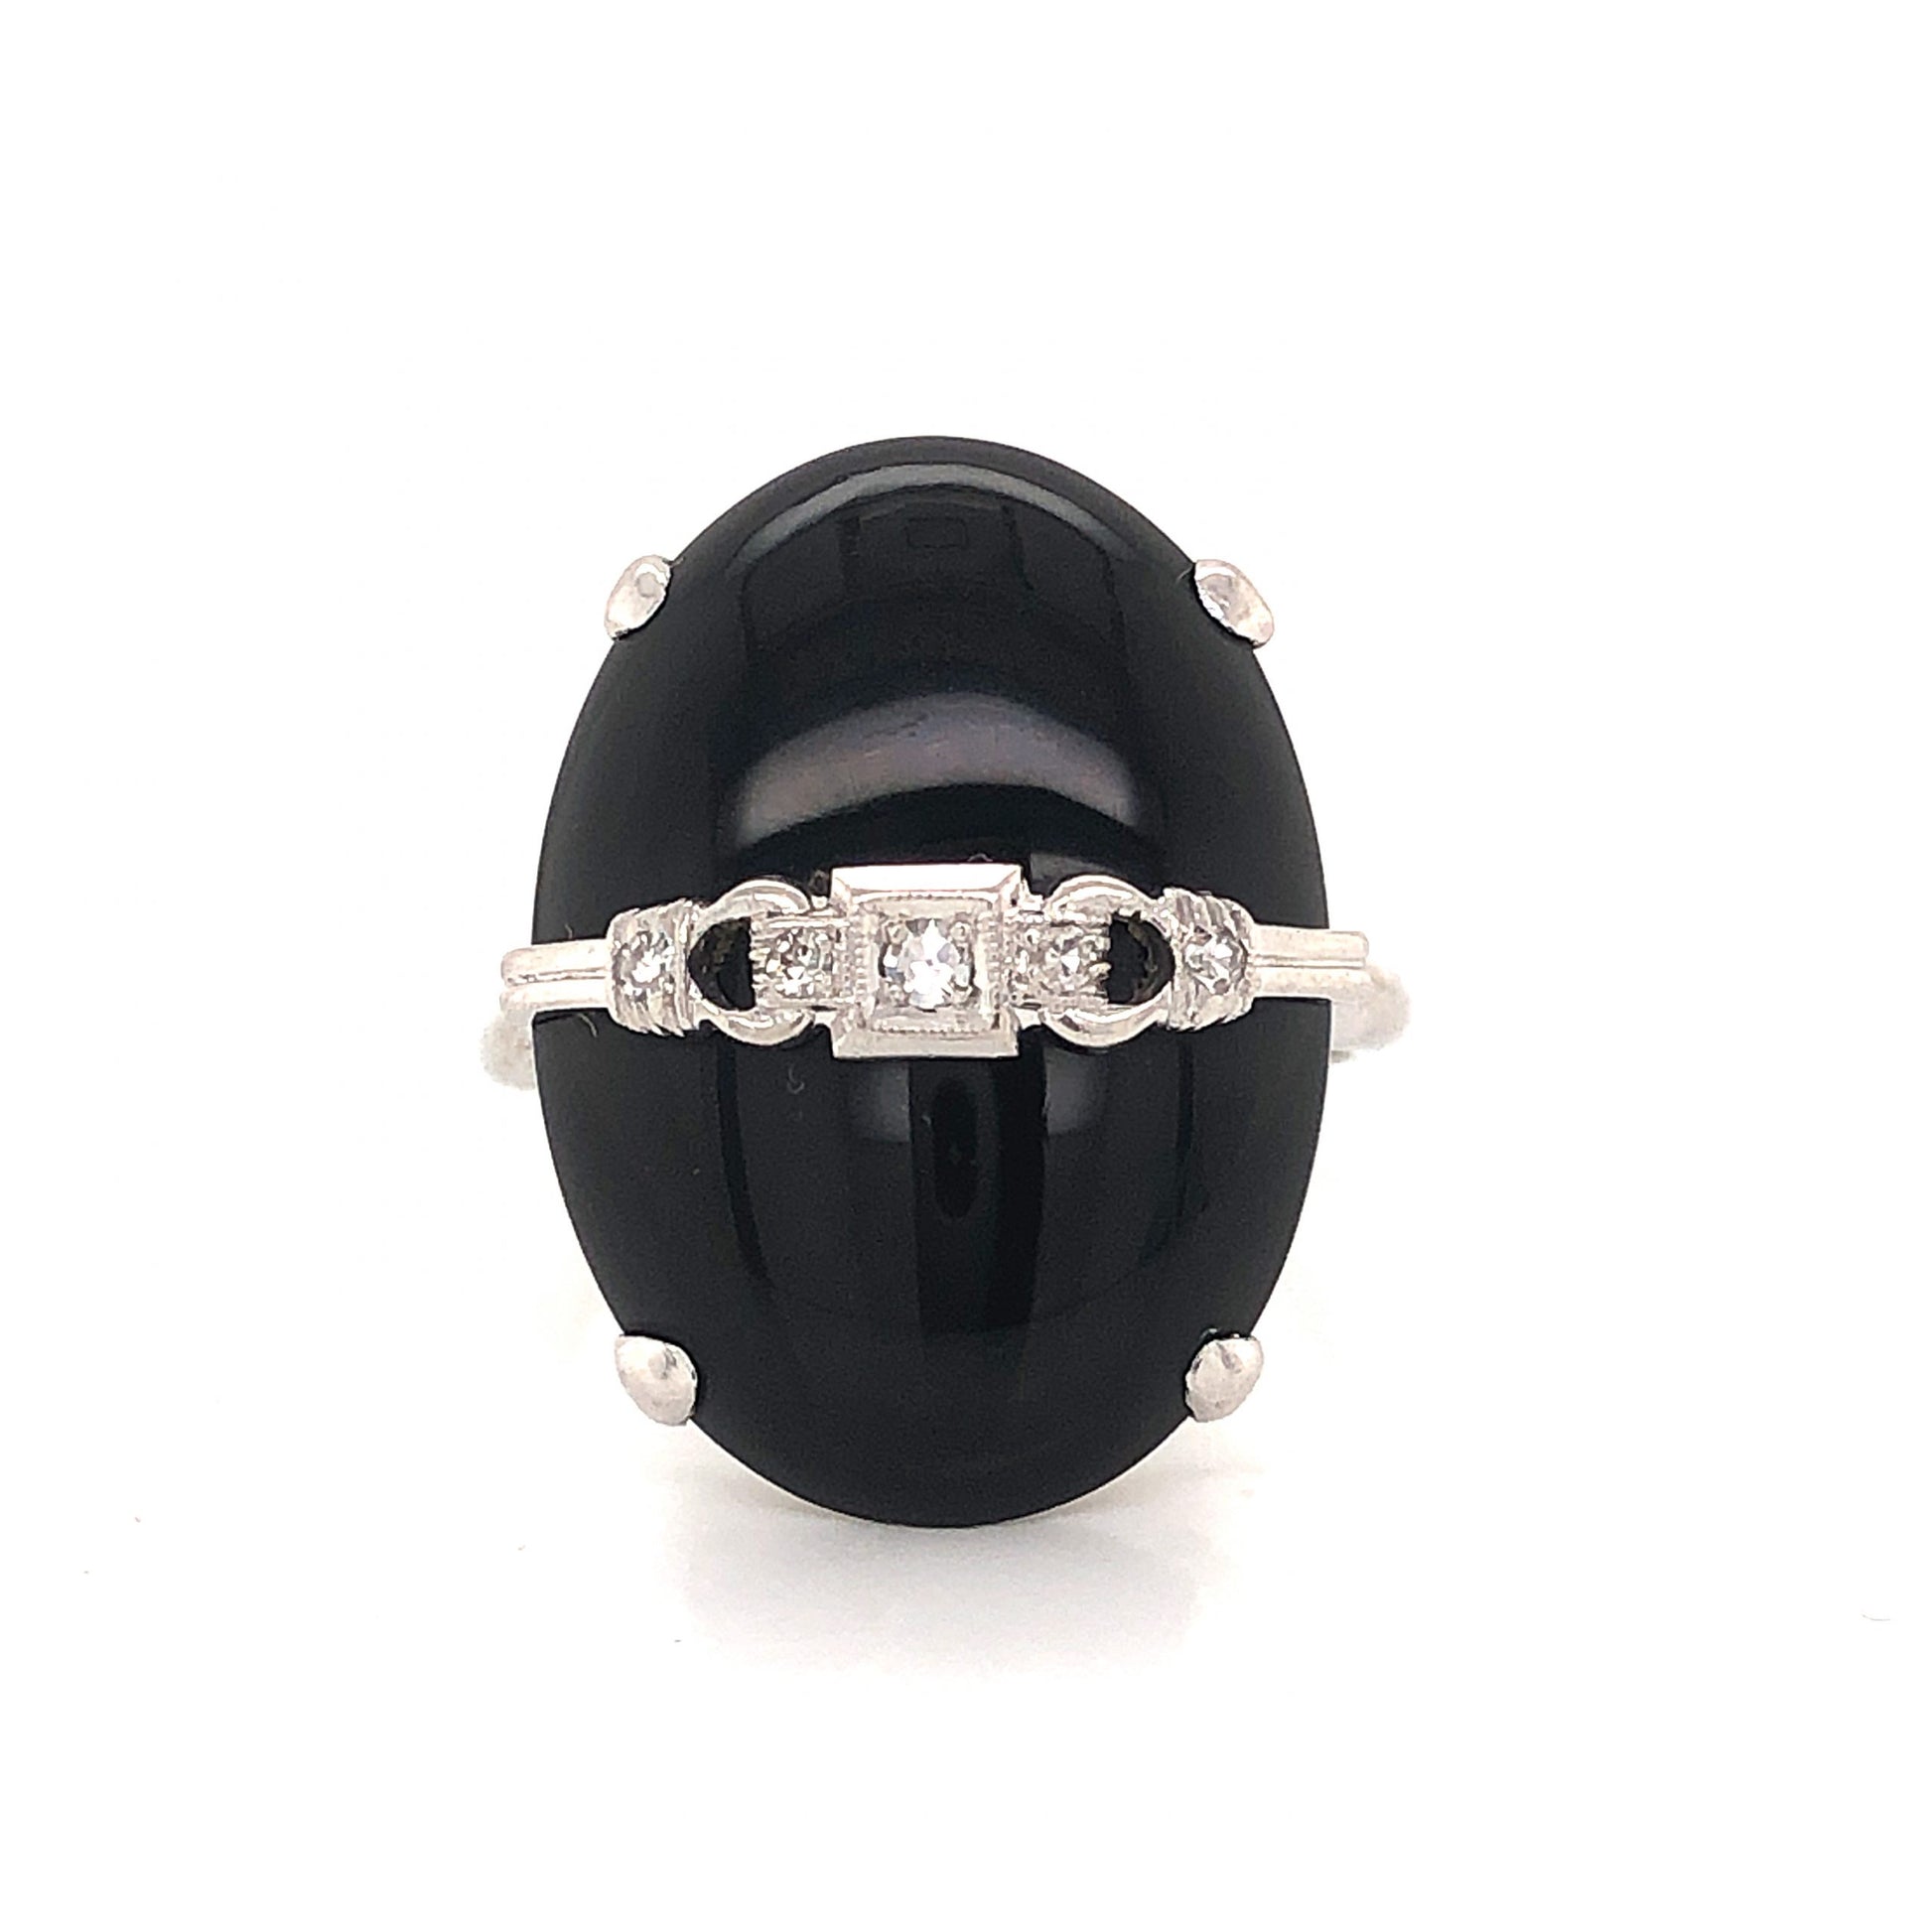 Art Deco Oval Onyx and Diamond Ring in 14k White GoldComposition: 14 Karat White Gold Ring Size: 7.5 Total Diamond Weight: .07ct Total Gram Weight: 5.2 g Inscription: 14
      